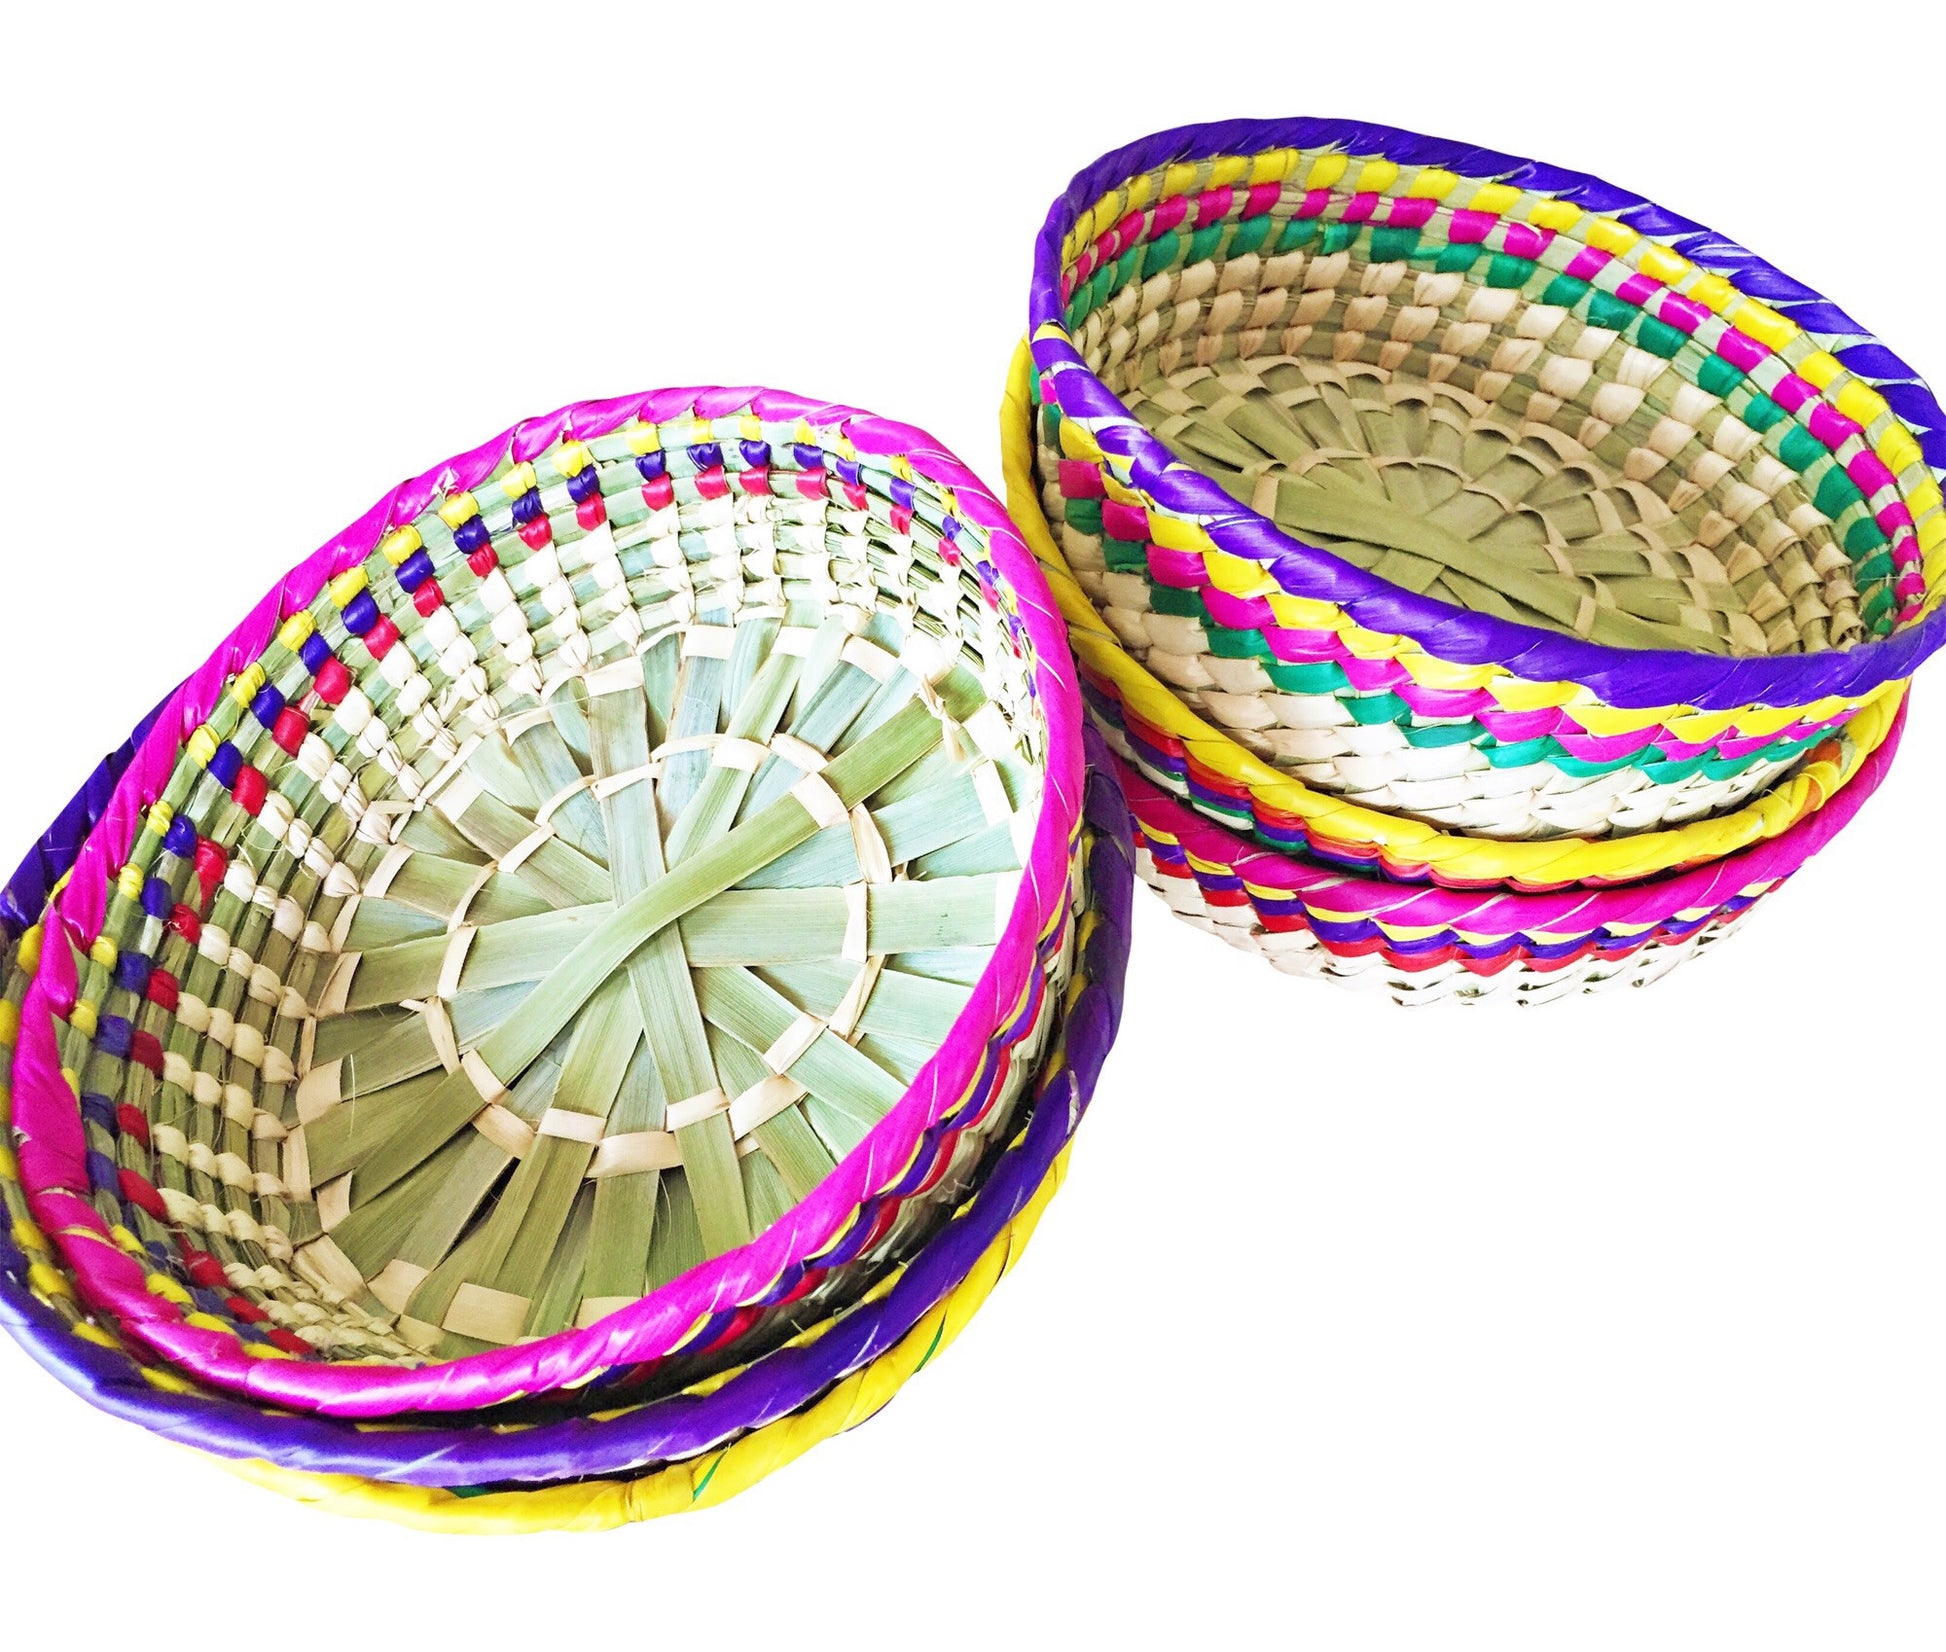 Straw woven Decorative Basket from Mexico - MesaChic - 1